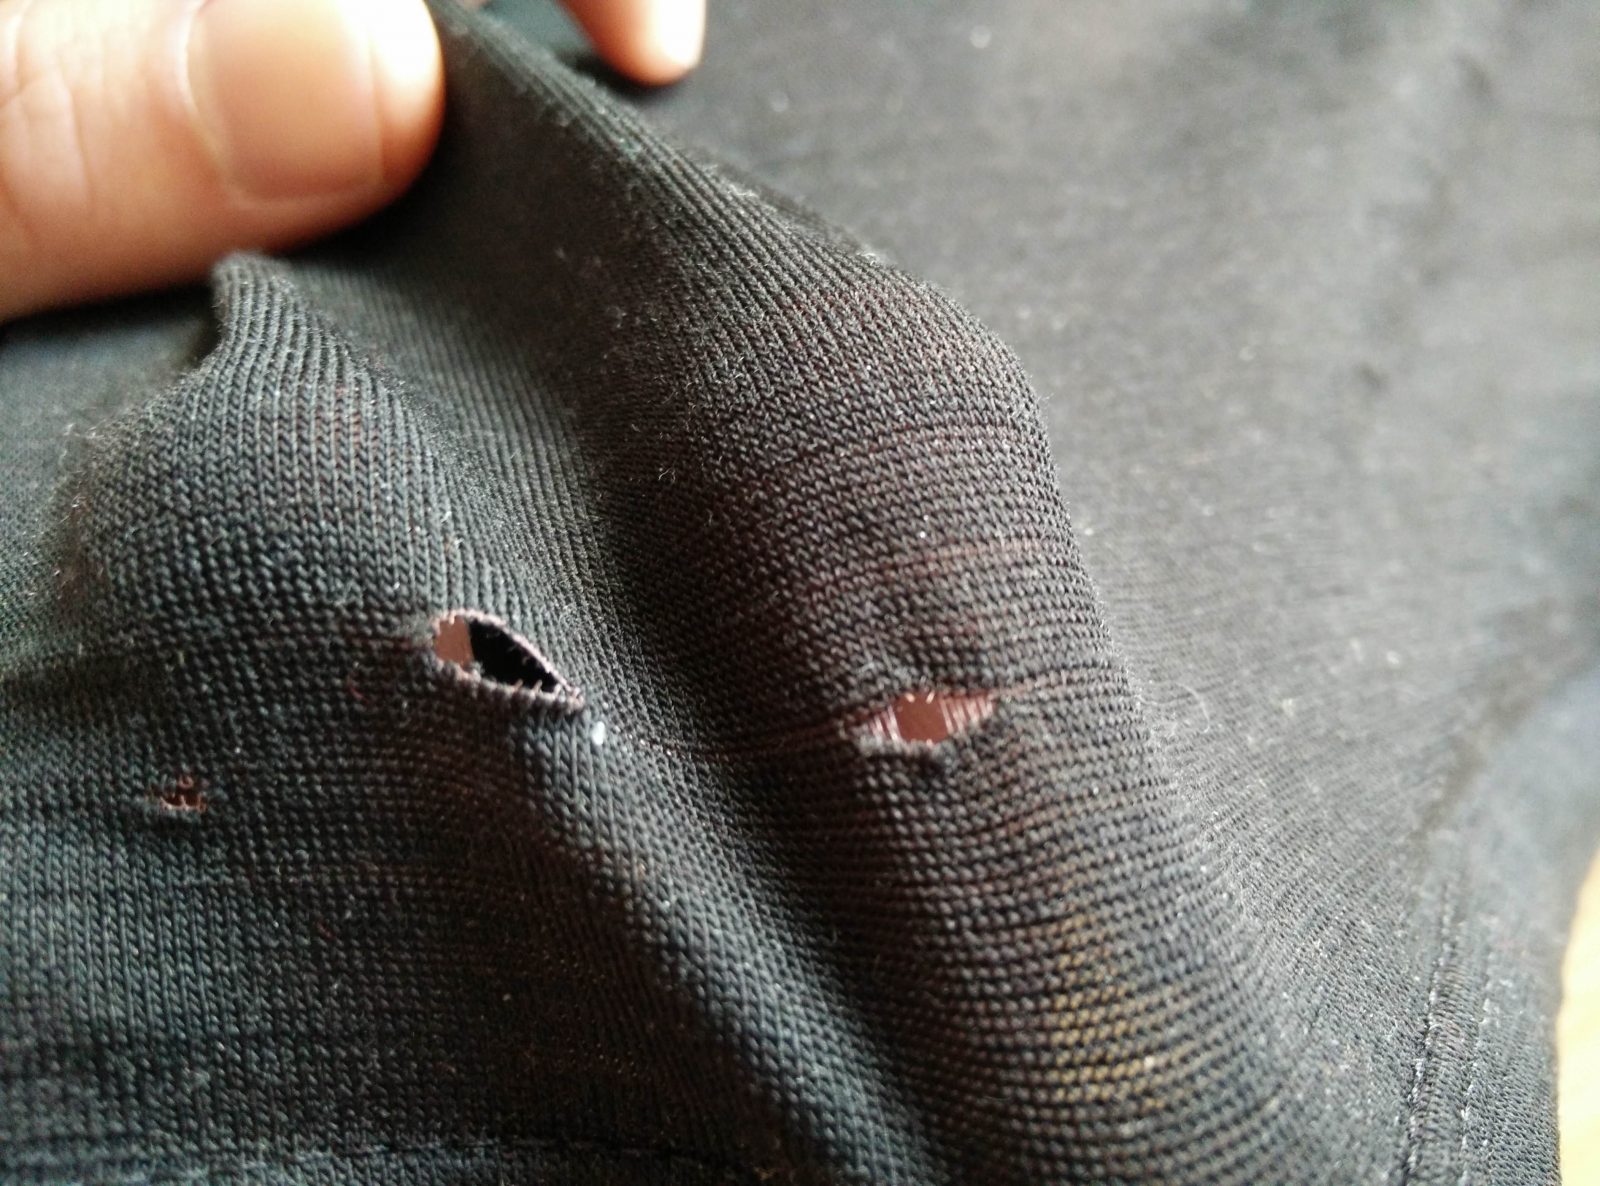  Patch Large Holes In Clothes